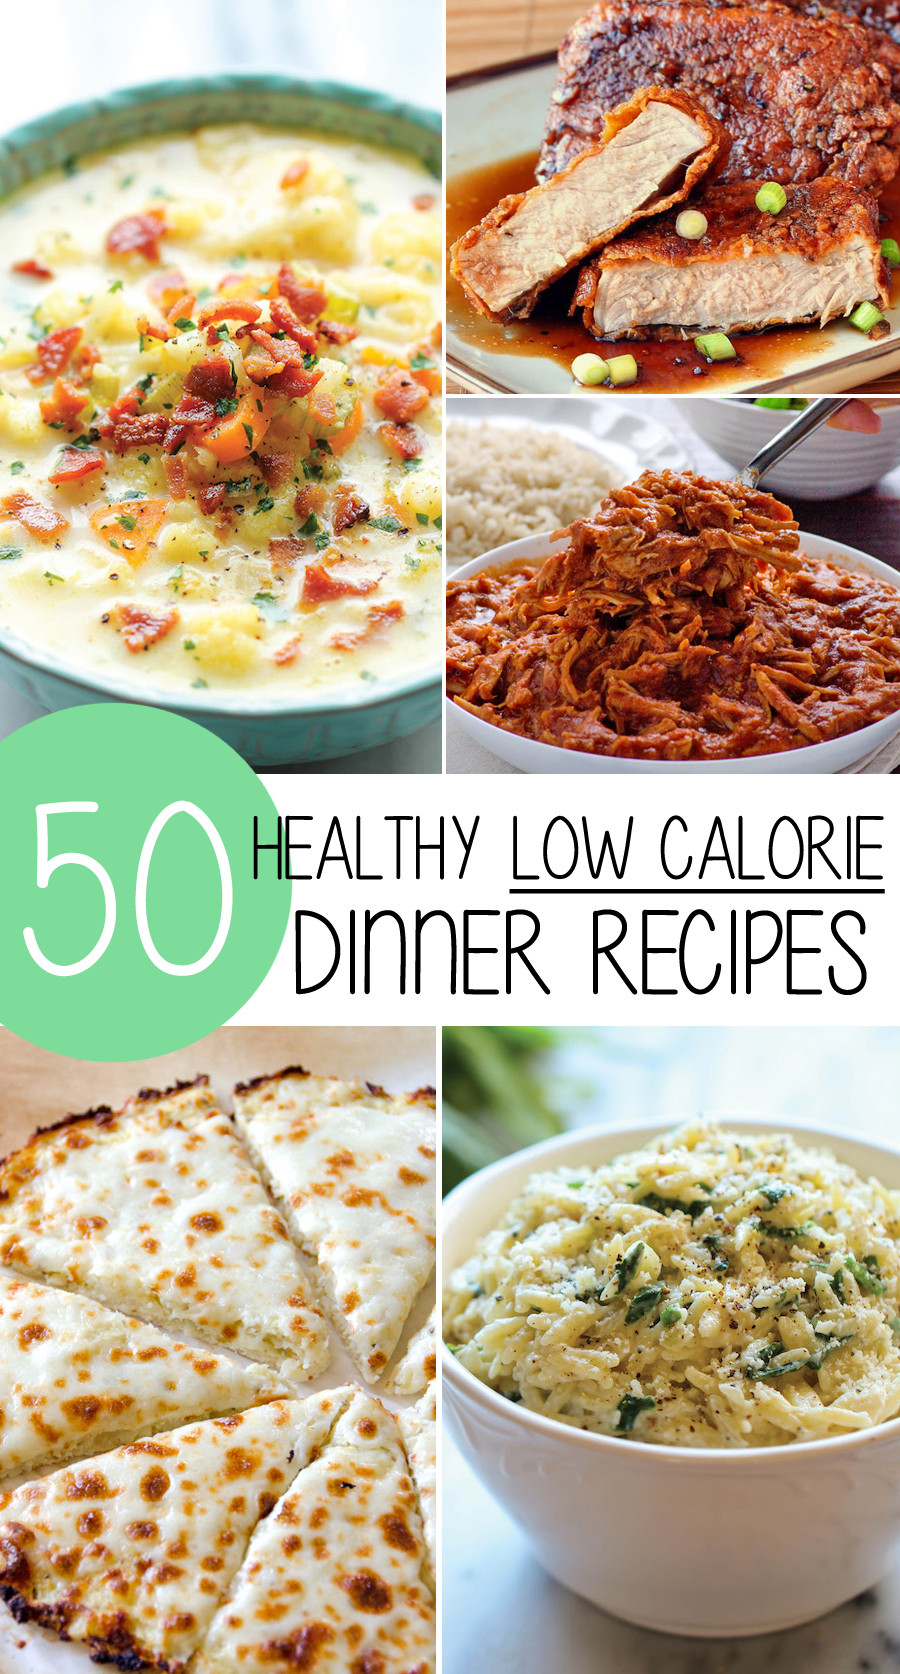 Low Calorie Meal Recipes
 50 Healthy Low Calorie Weight Loss Dinner Recipes